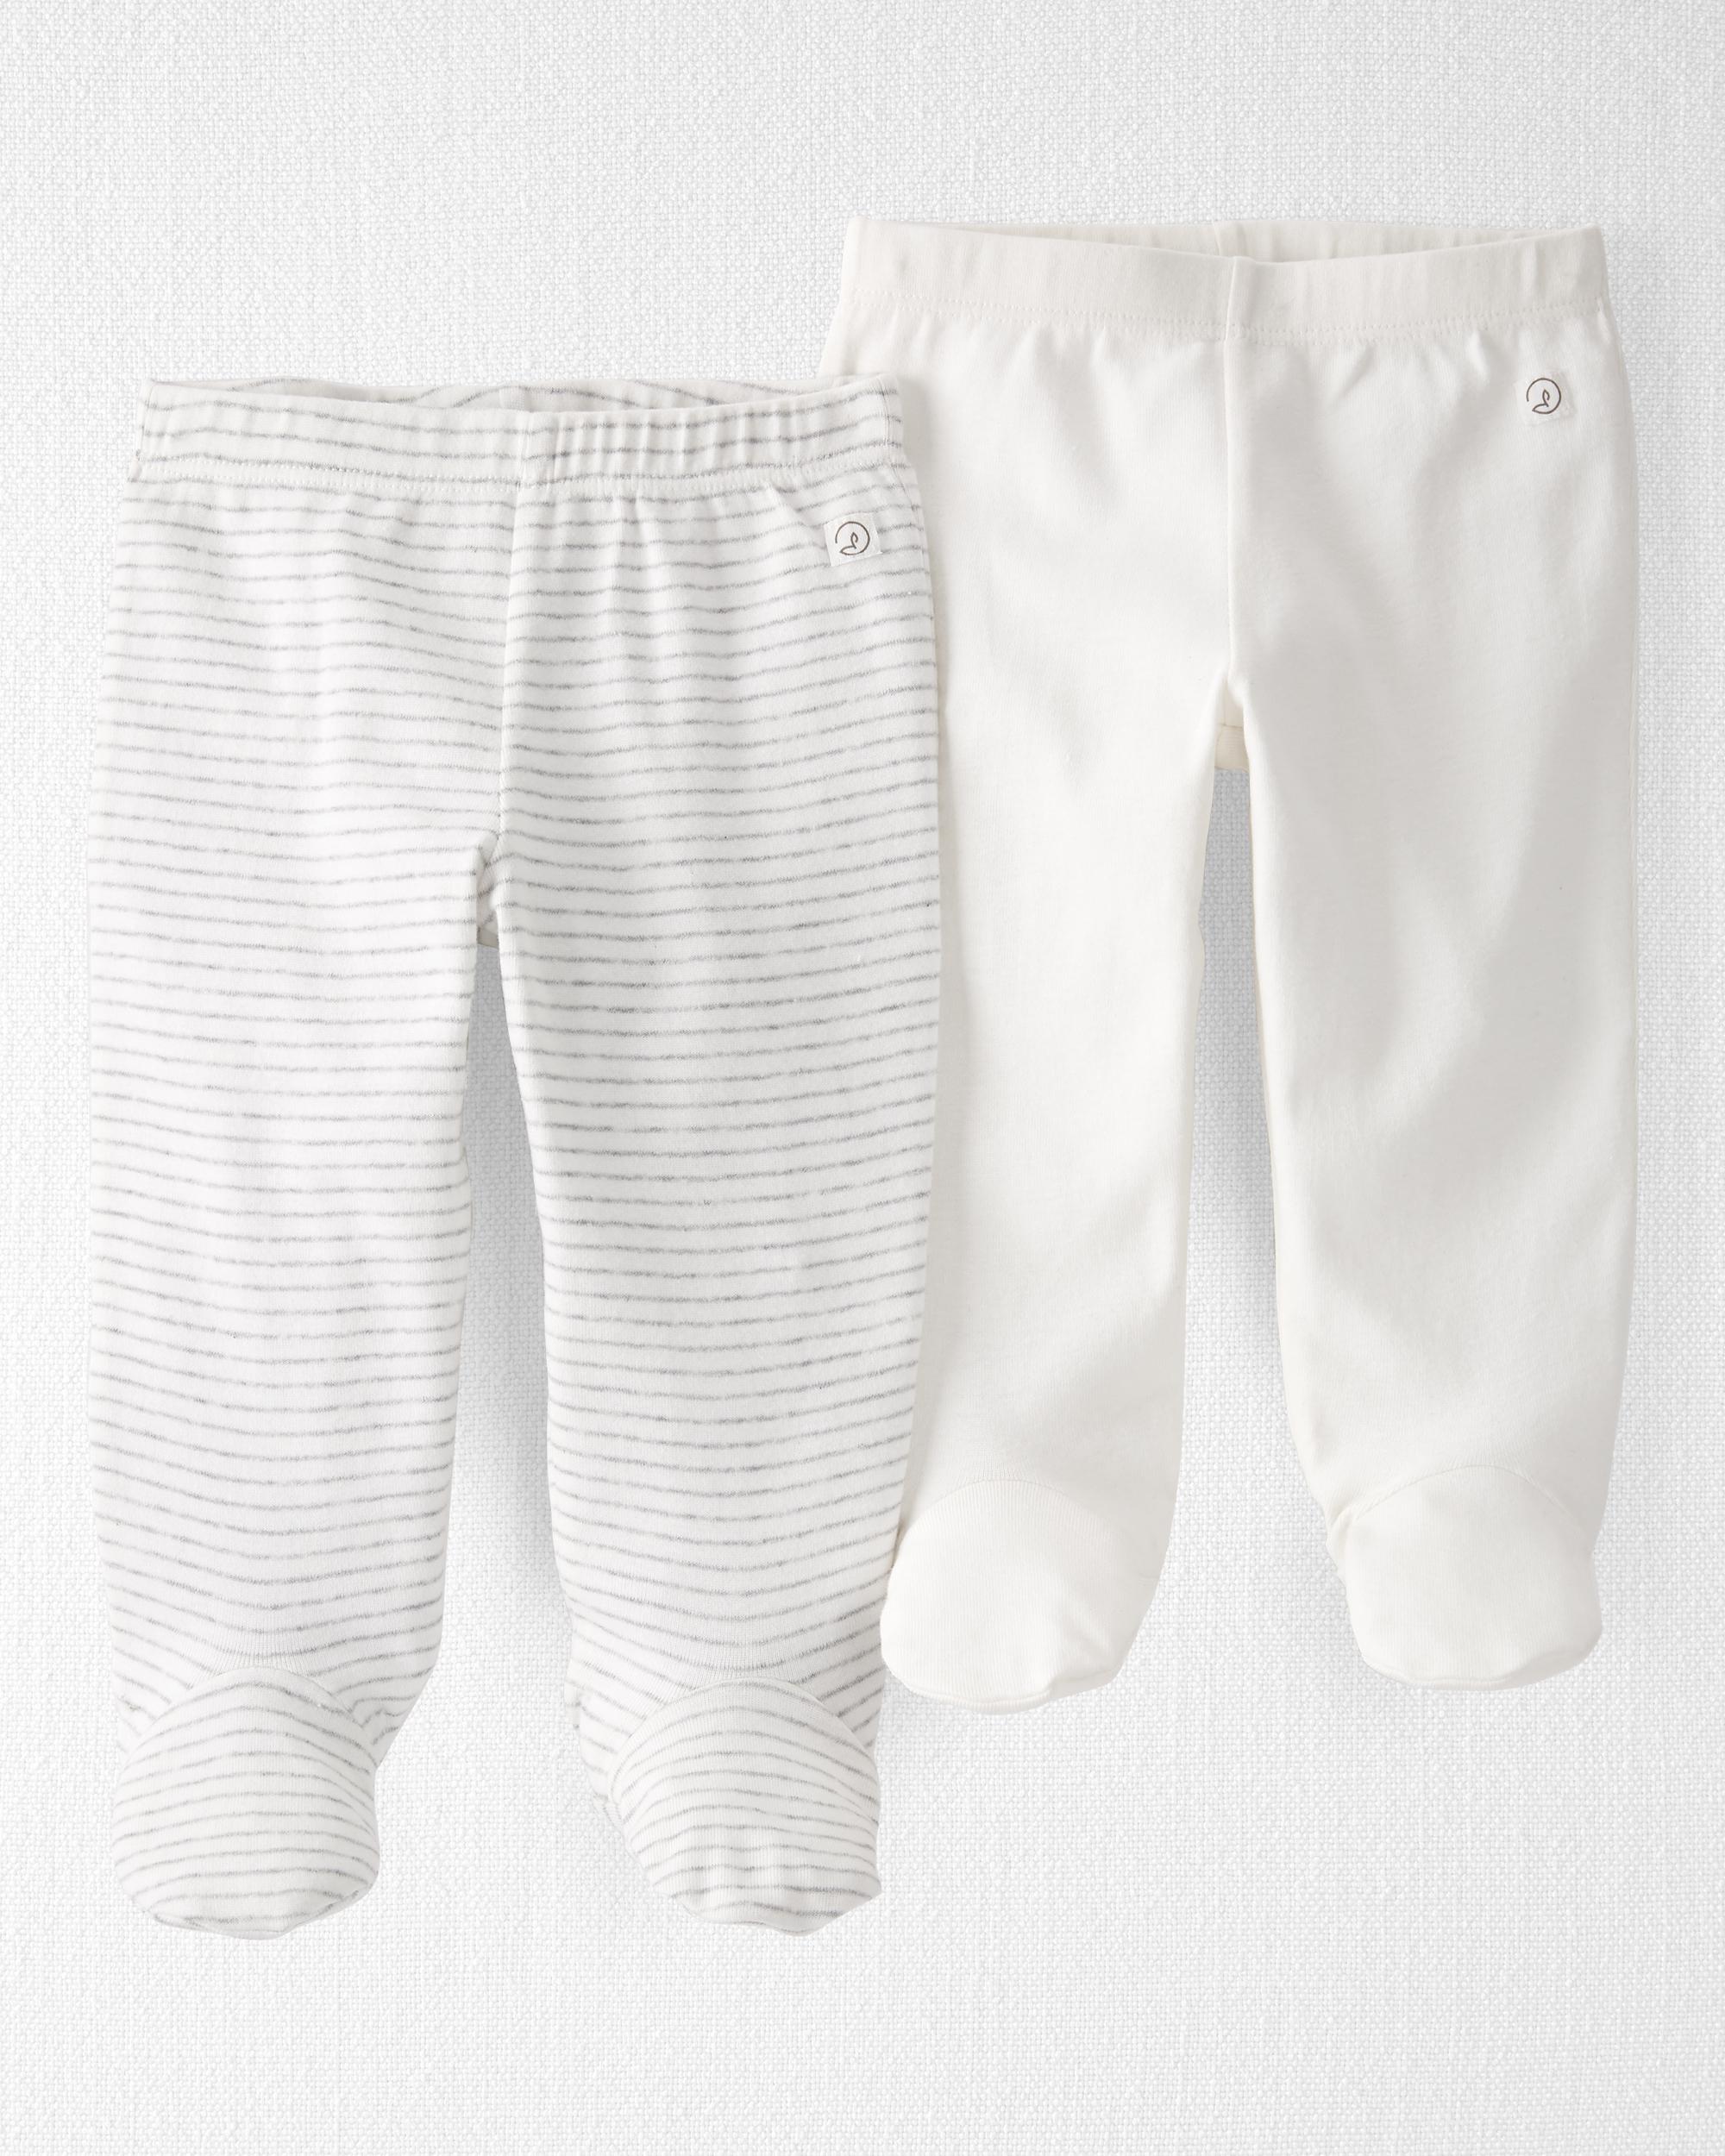 Baby Nay Little Girls White Short Sleeve Shirt and Matching Pants